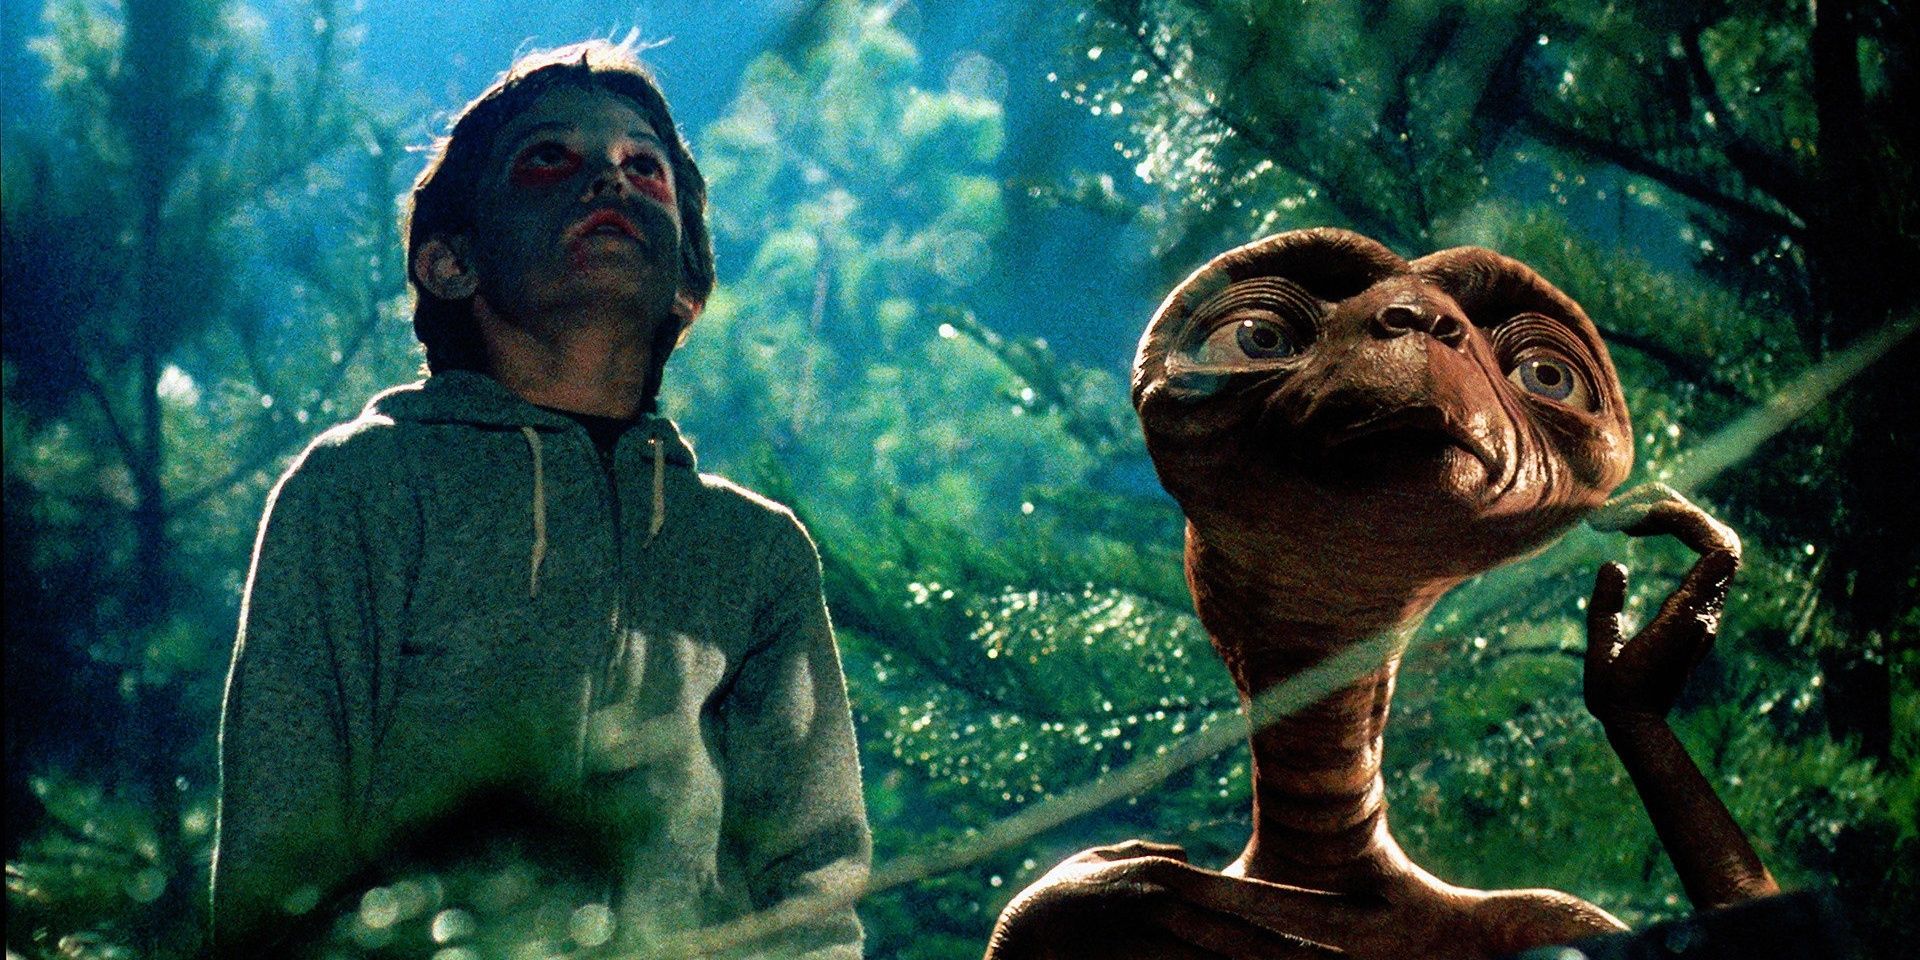 E.T. and Elliot looking to the sky in E.T. The Extra-Terrestrial